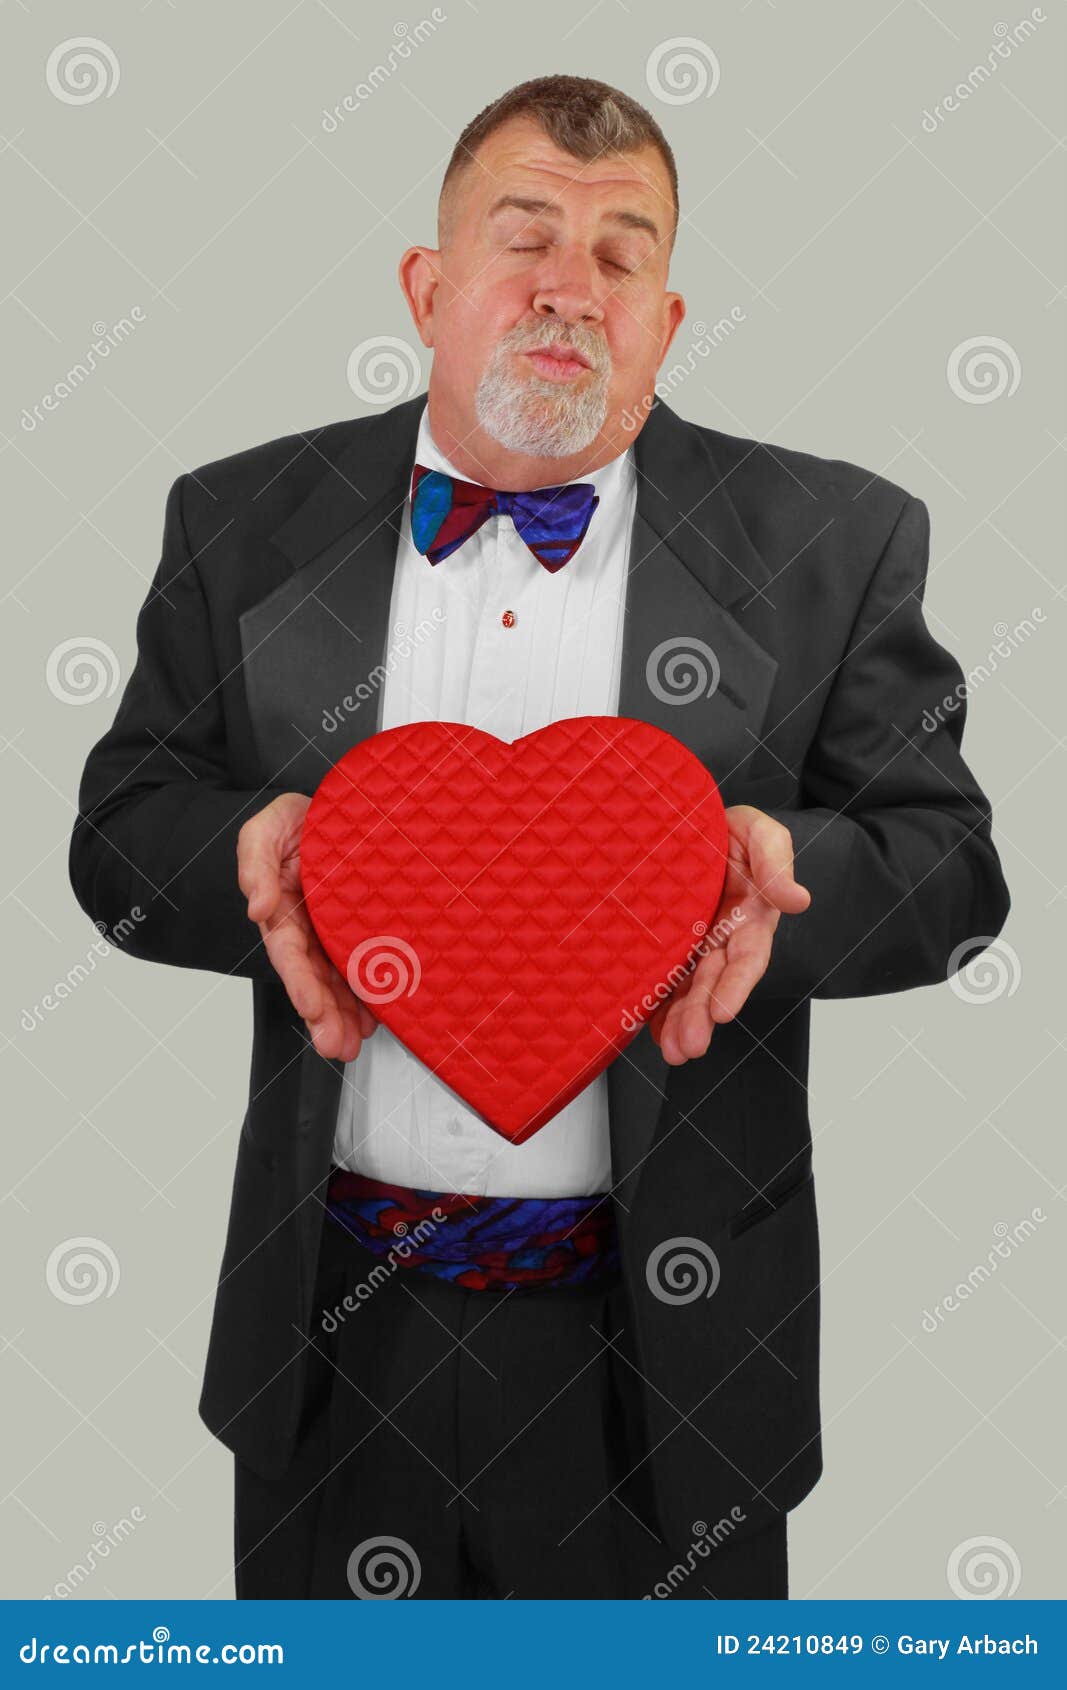 adult man offering valentine's day kiss and candy